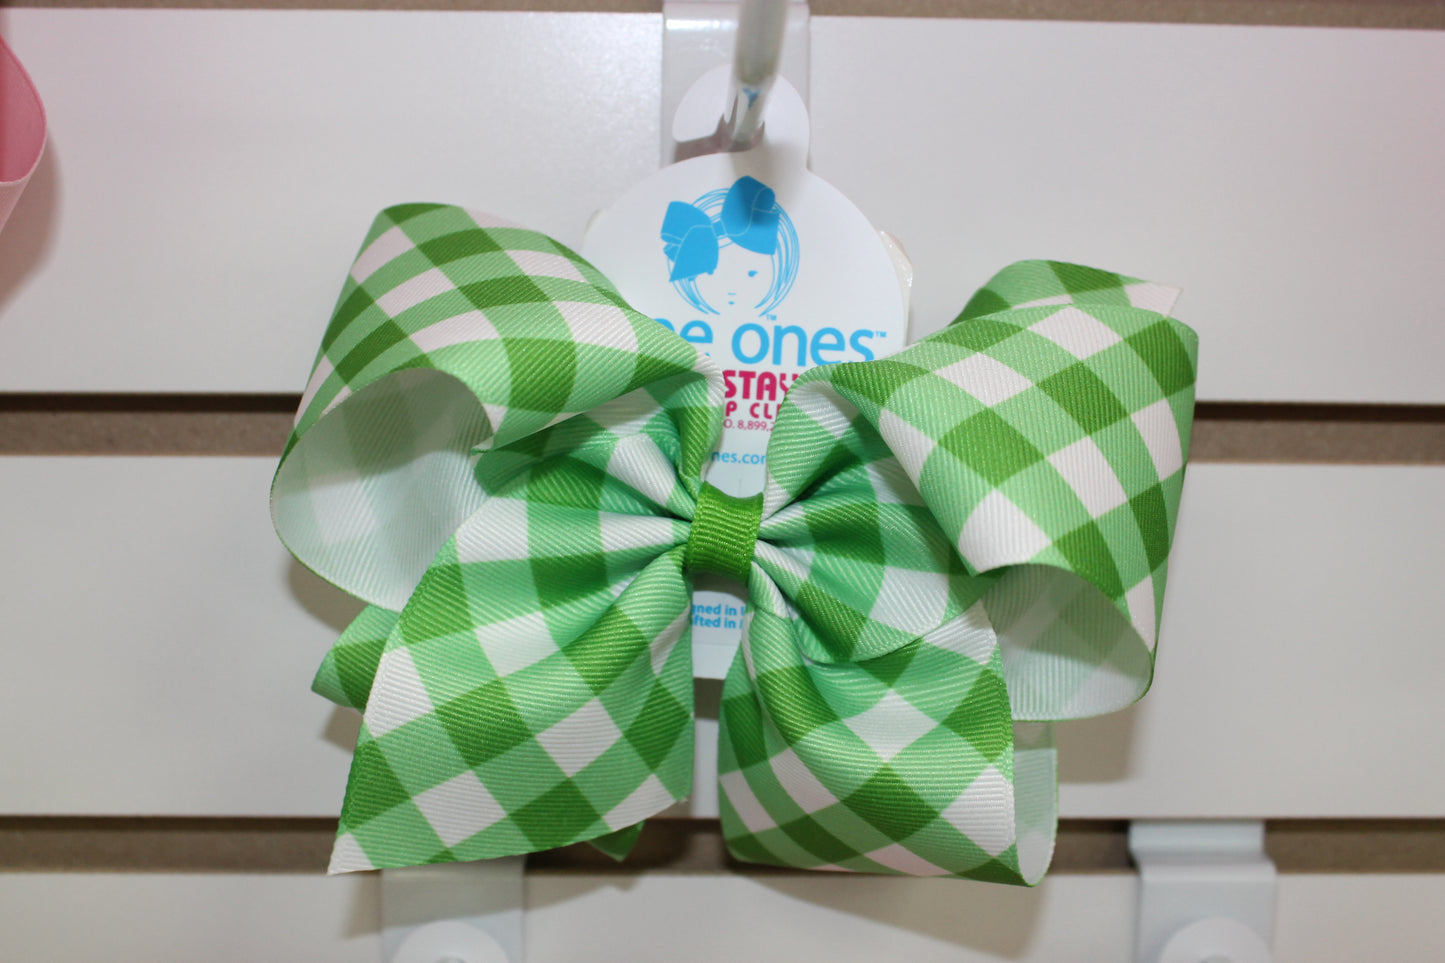 King Jumbo Check Print Bow Kids Hair Accessories Wee Ones Apple Green  